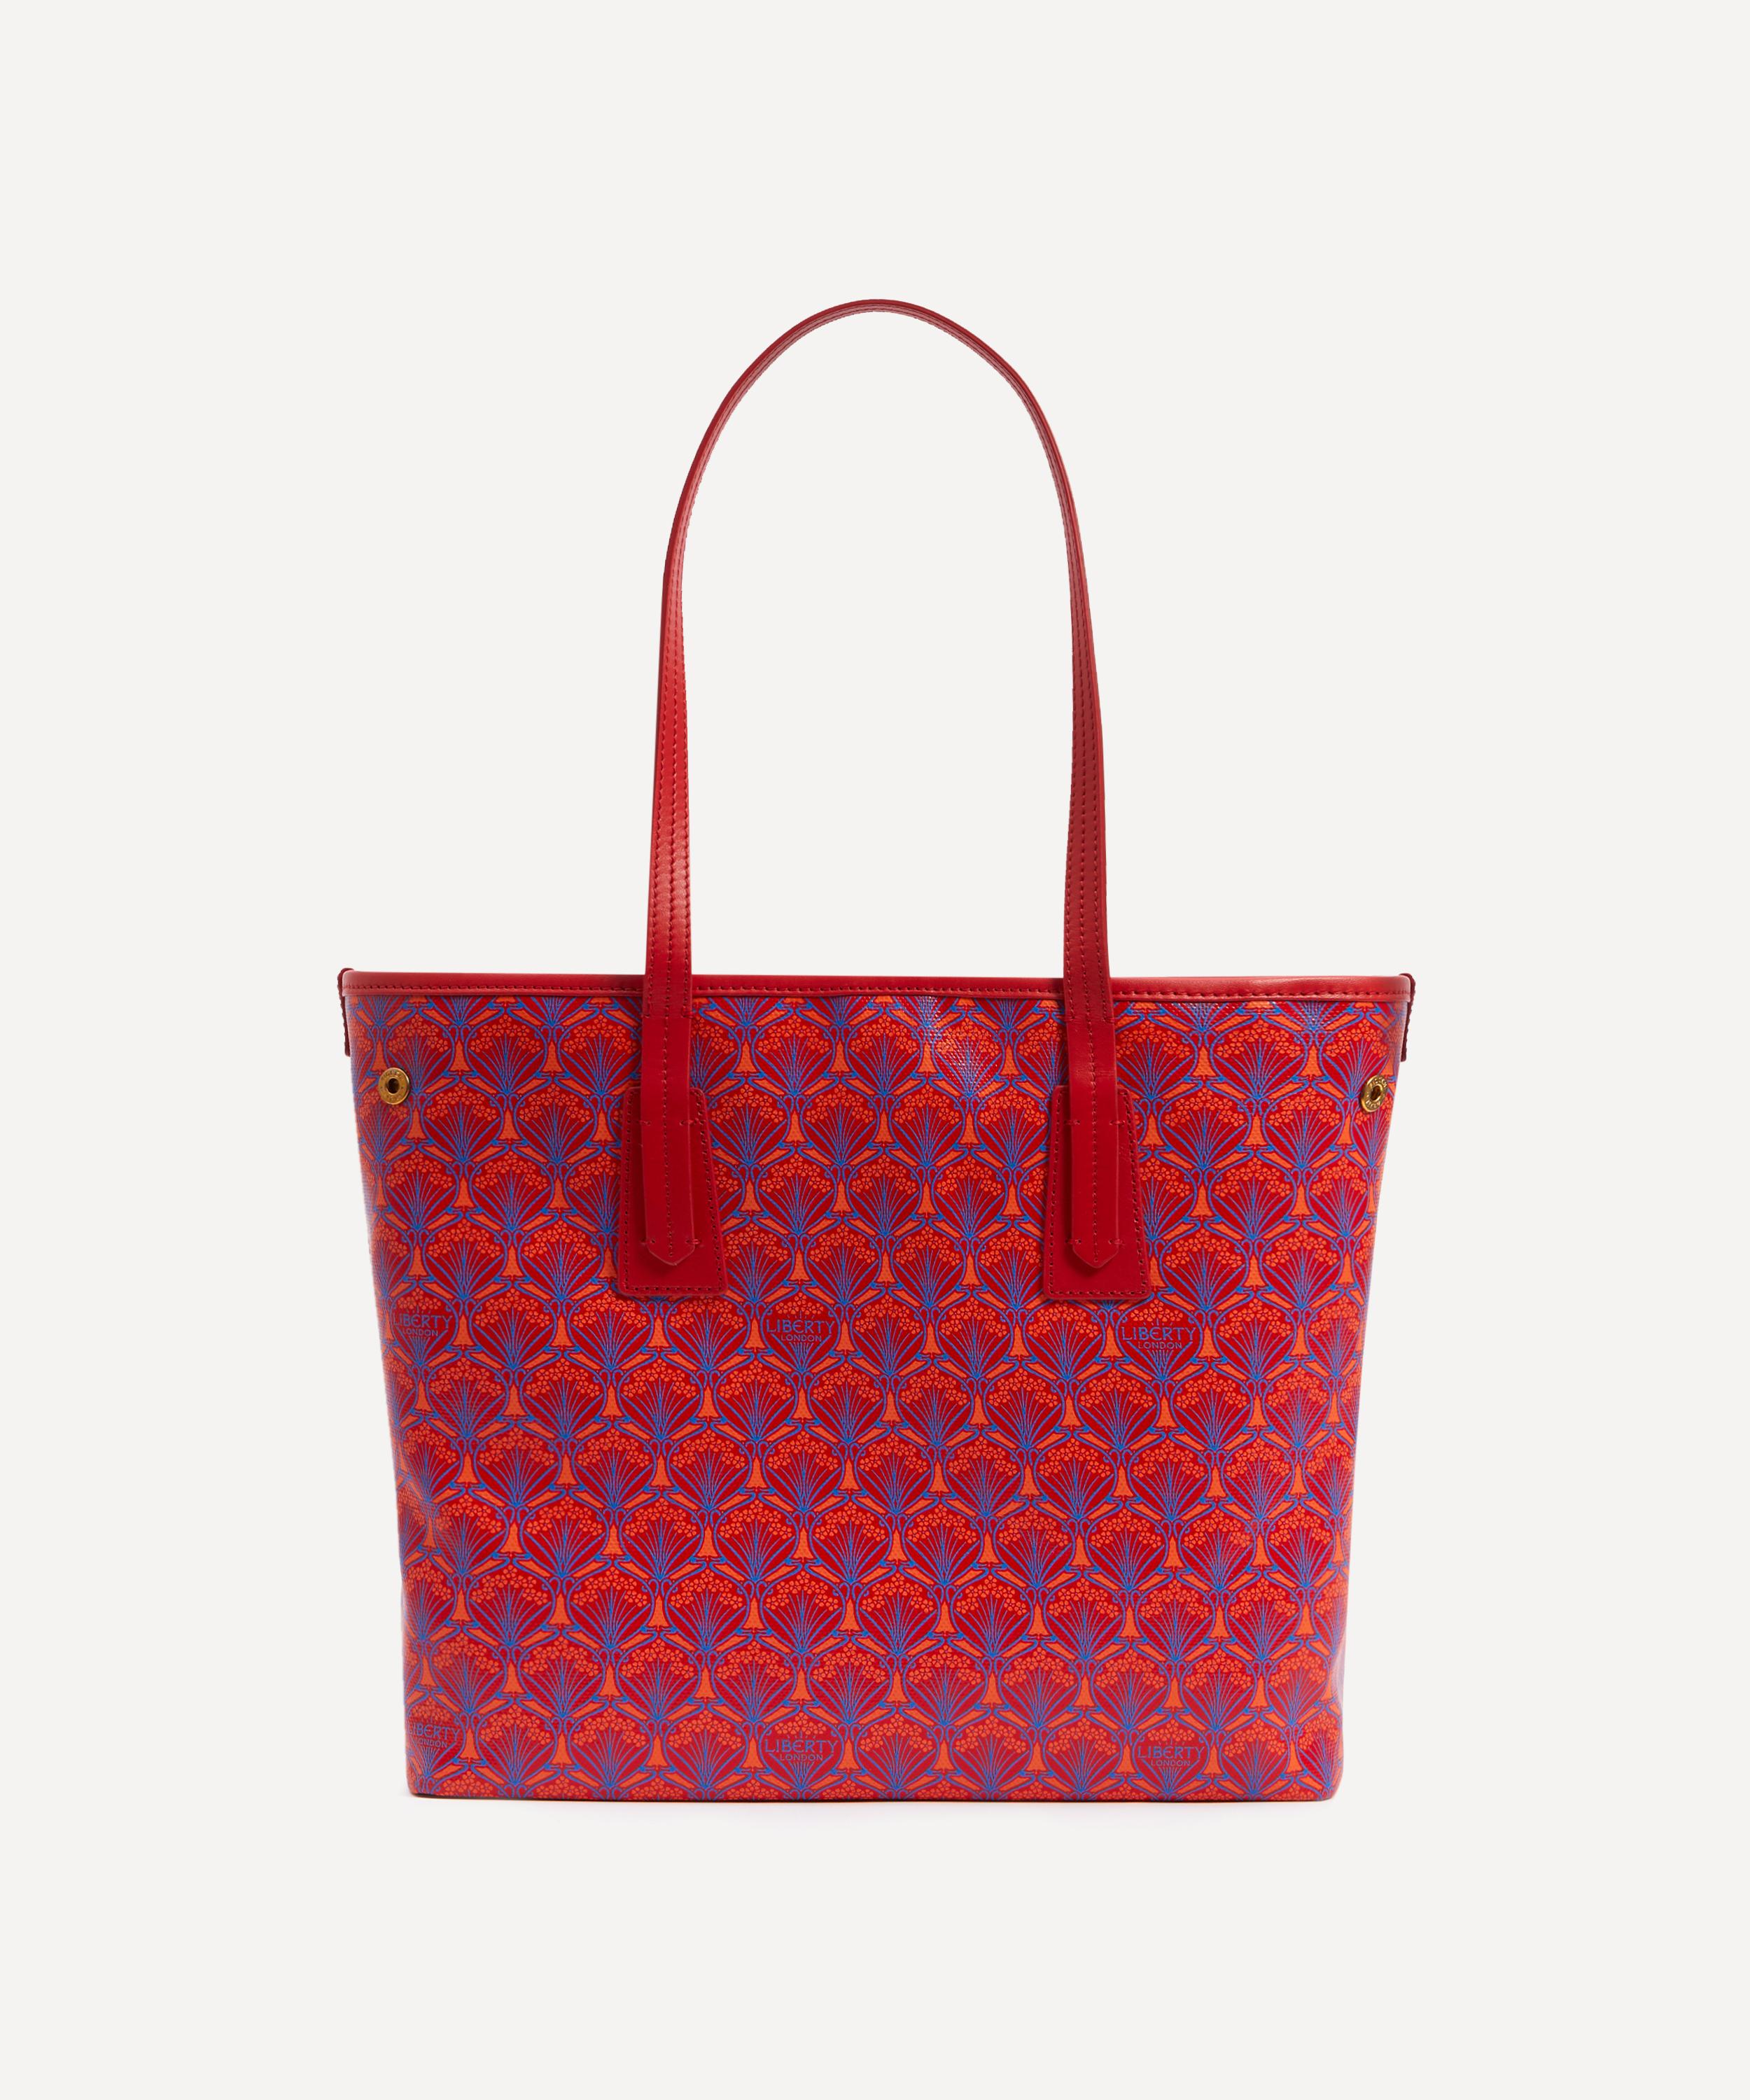 Little Marlborough Tote Bag in Iphis Canvas | Liberty London